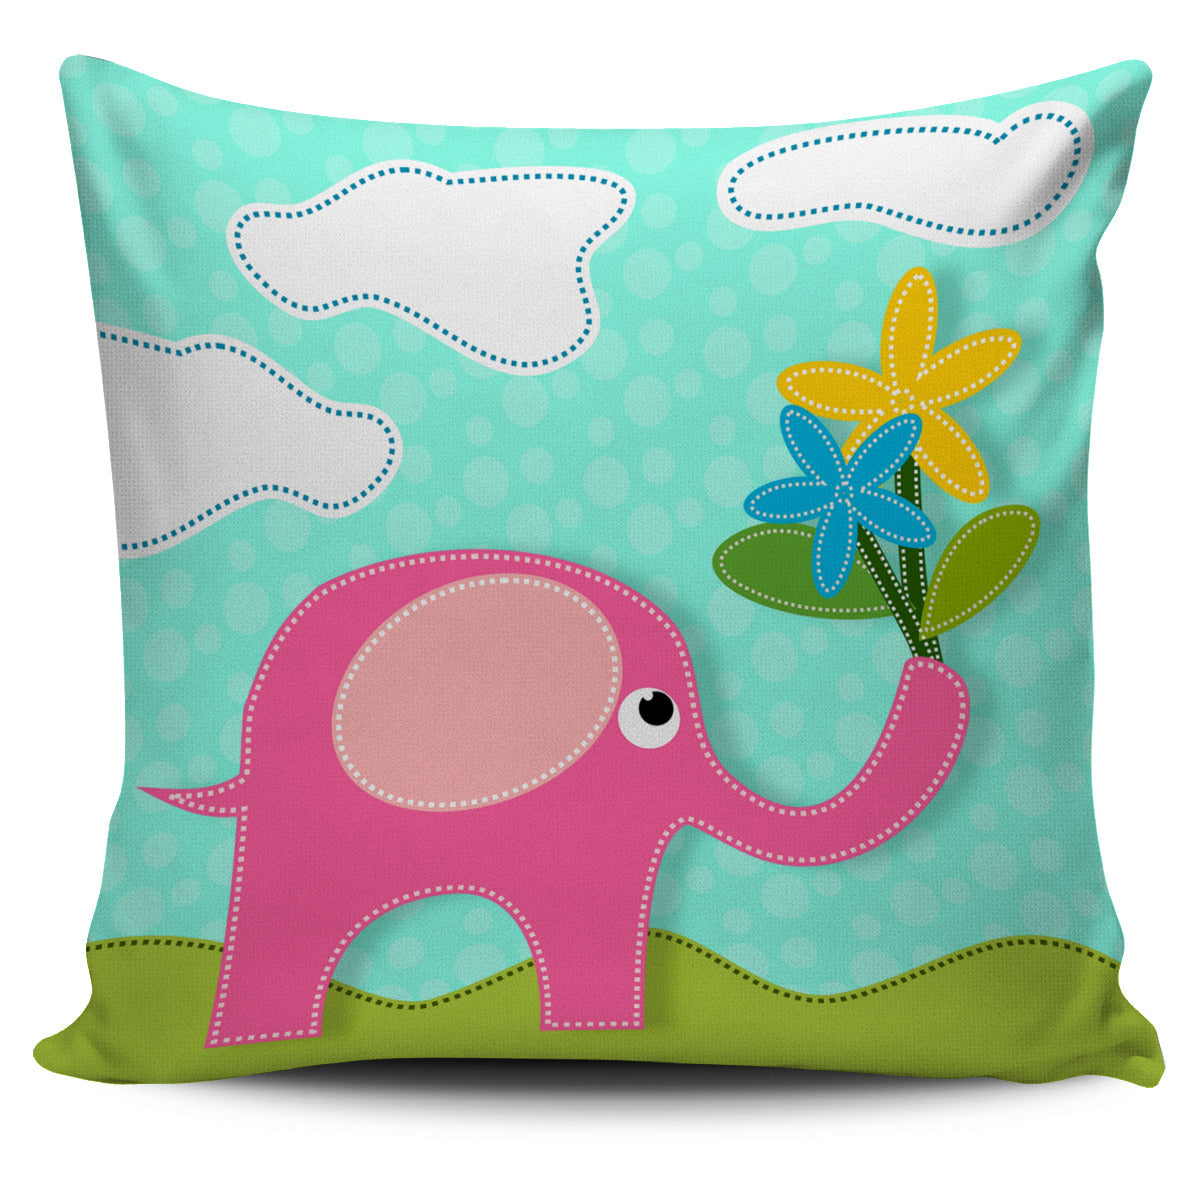 Pink Elephant Pillow Covers - Trends Mart Club